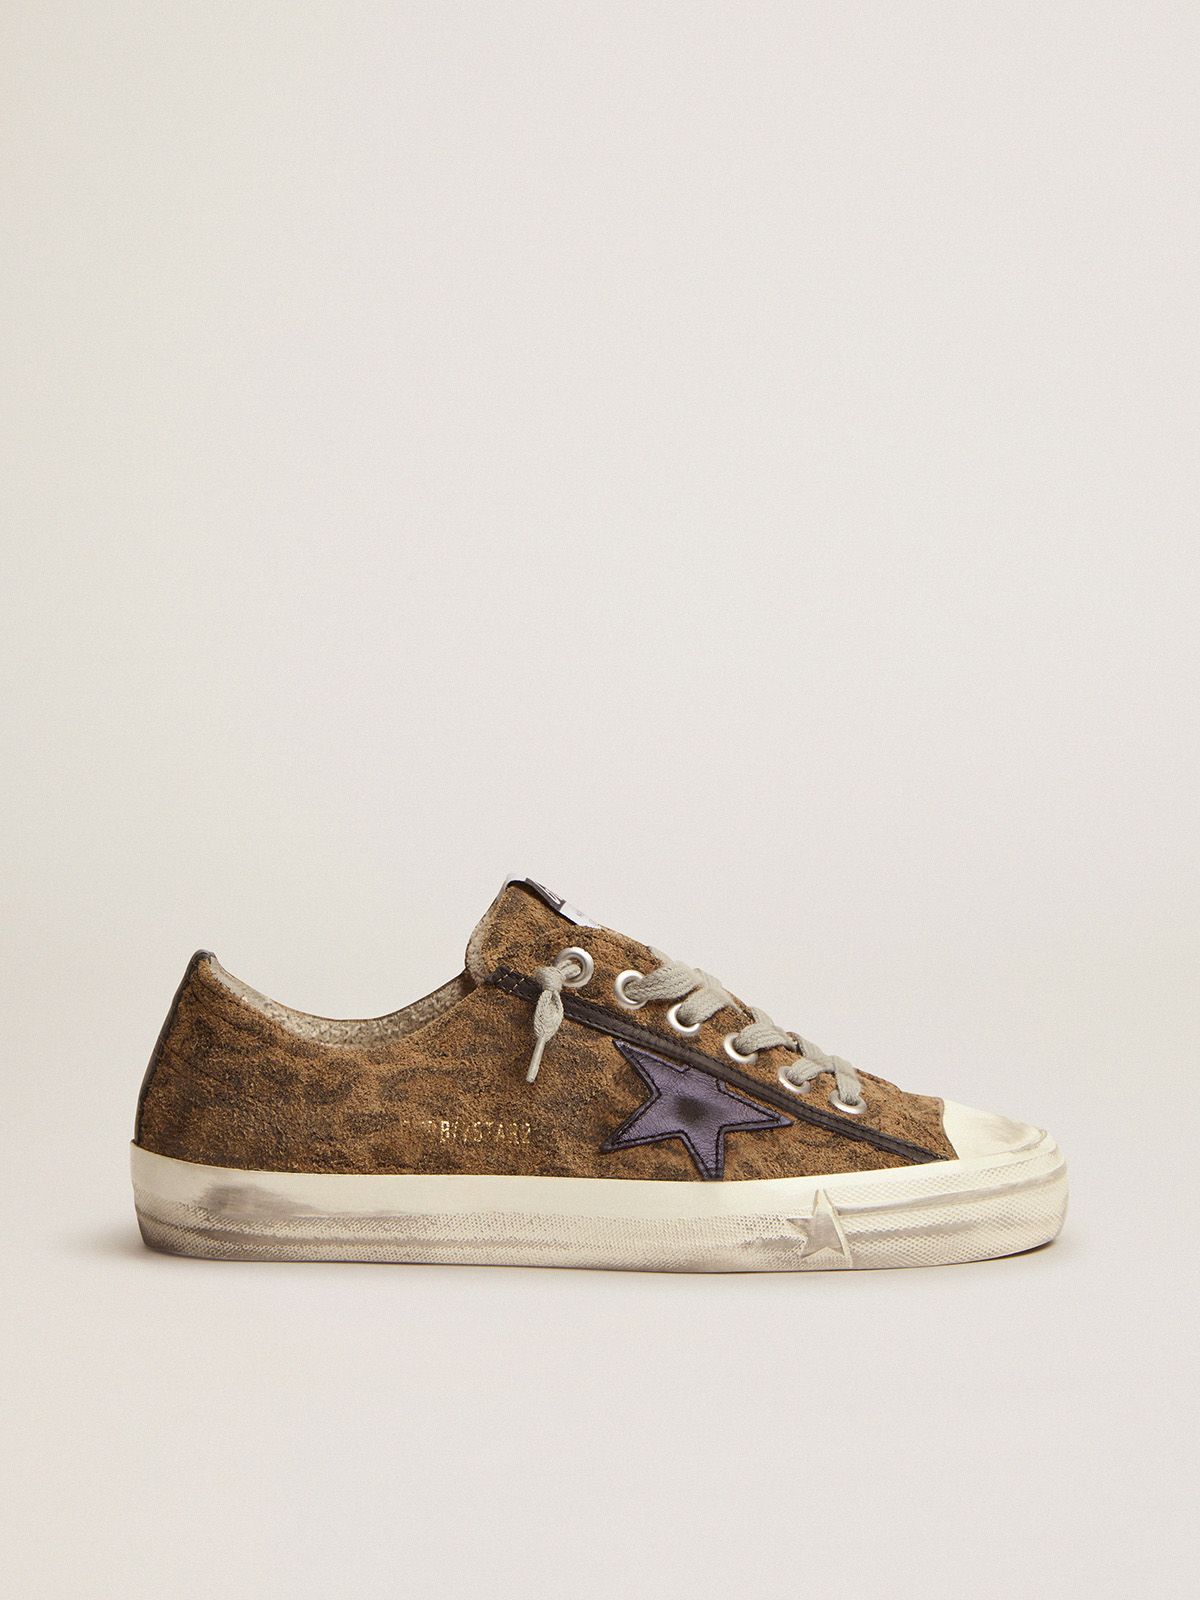 golden goose laminated suede leather black sneakers V-star in LTD with a star leopard-print